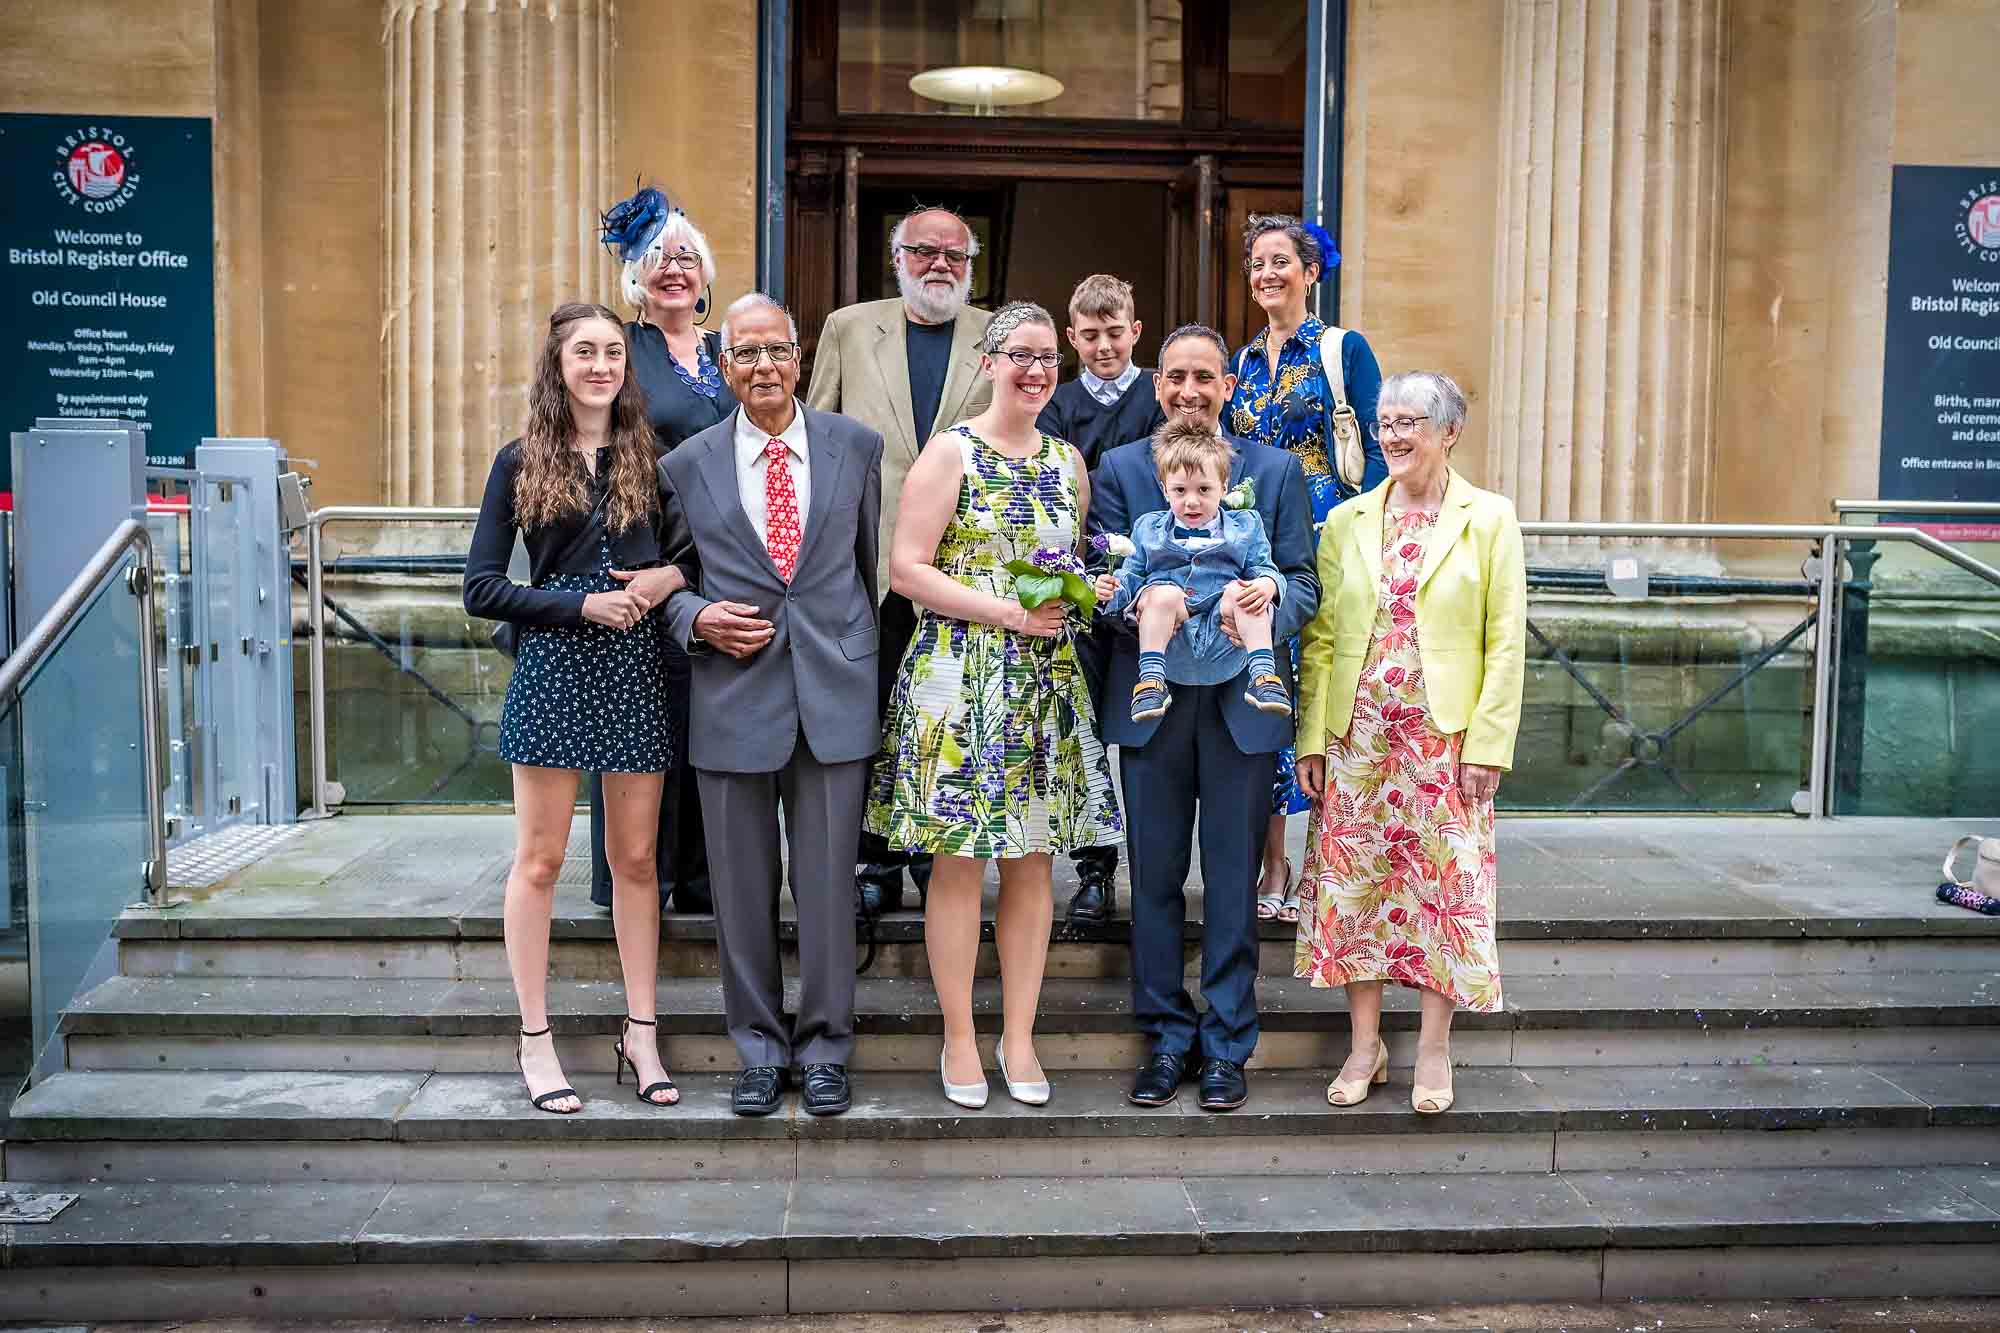 Portrait of whole family including little boy being held outside Bristol Register Office